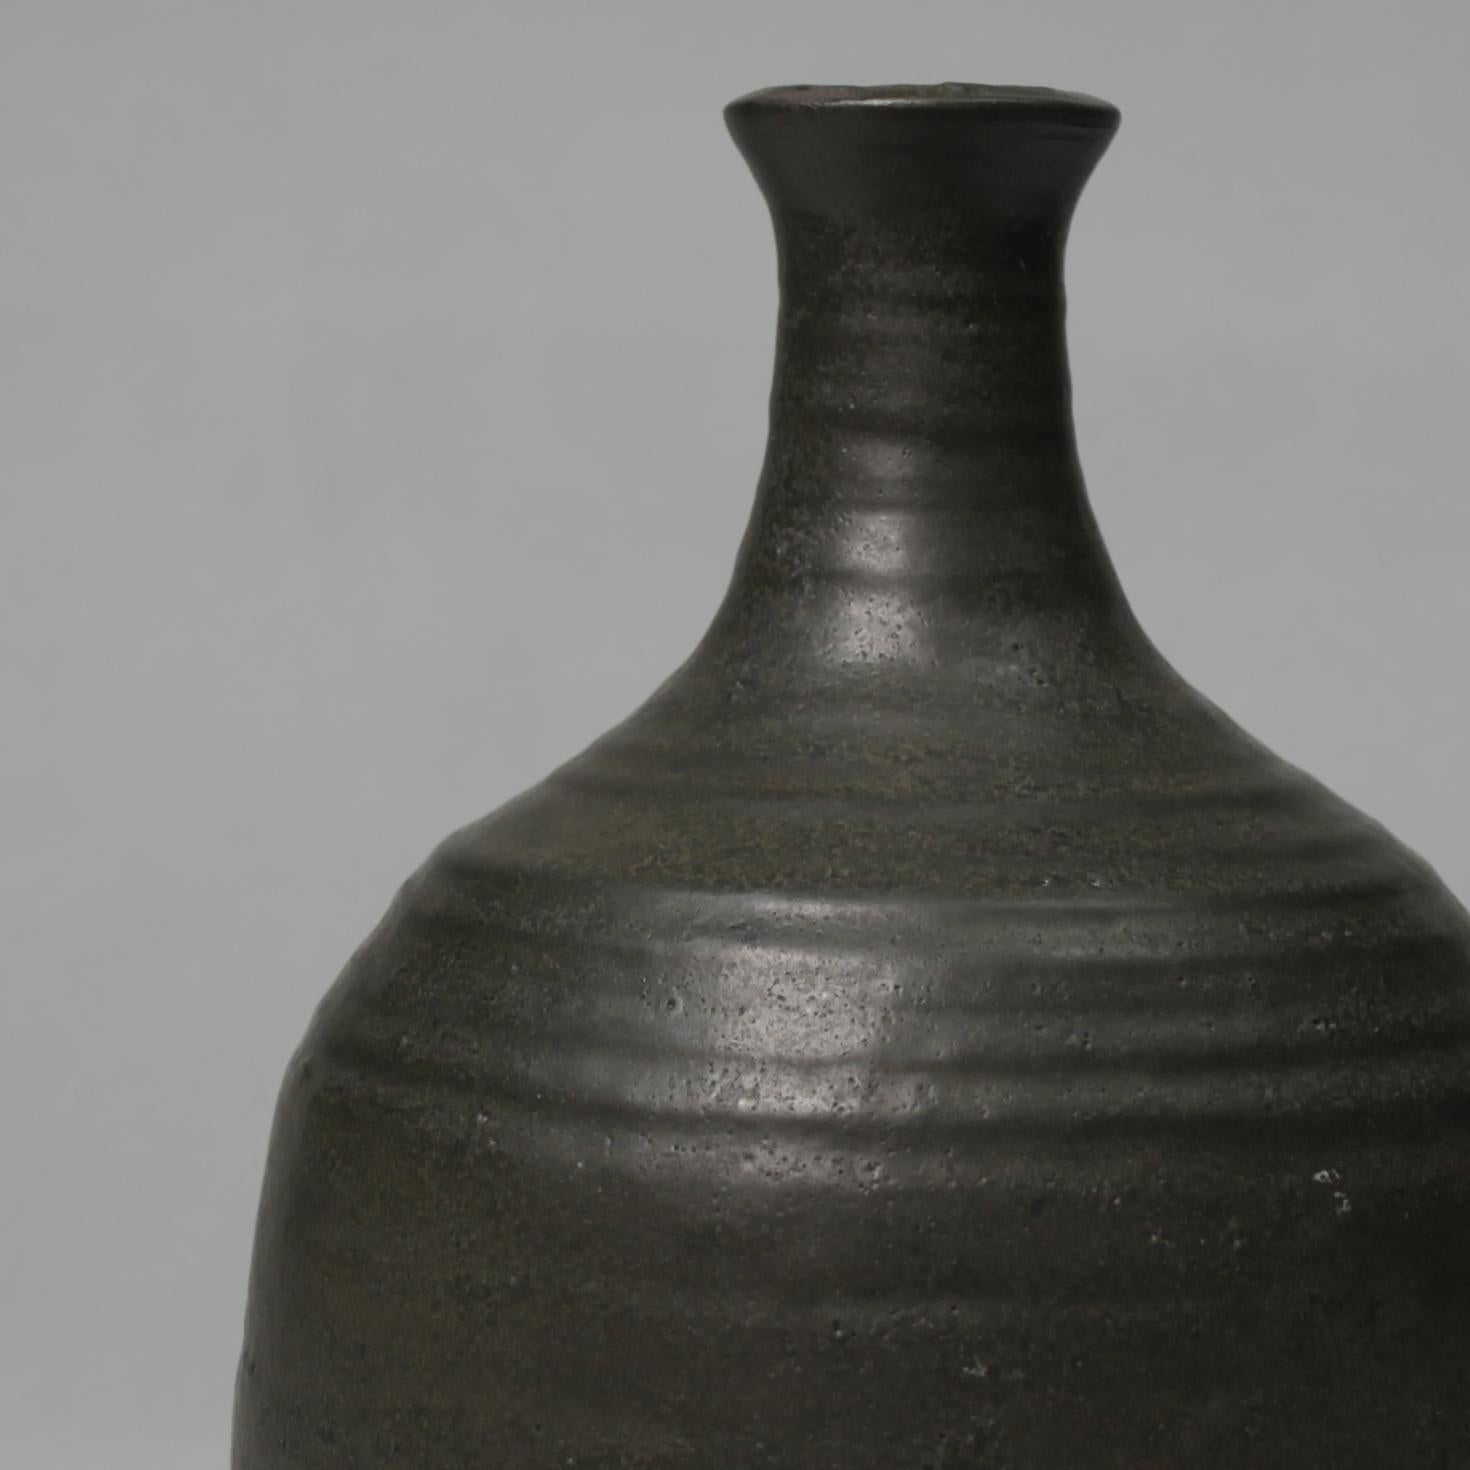 An exquisite hand-thrown ceramic vase with speckled dark green over glaze and a prominent black matte underglaze from the Dutch potter Guy van Hardenbroek. This piece was previously in the national collection of Rijks Verspreide Kunstvoorwerpen.